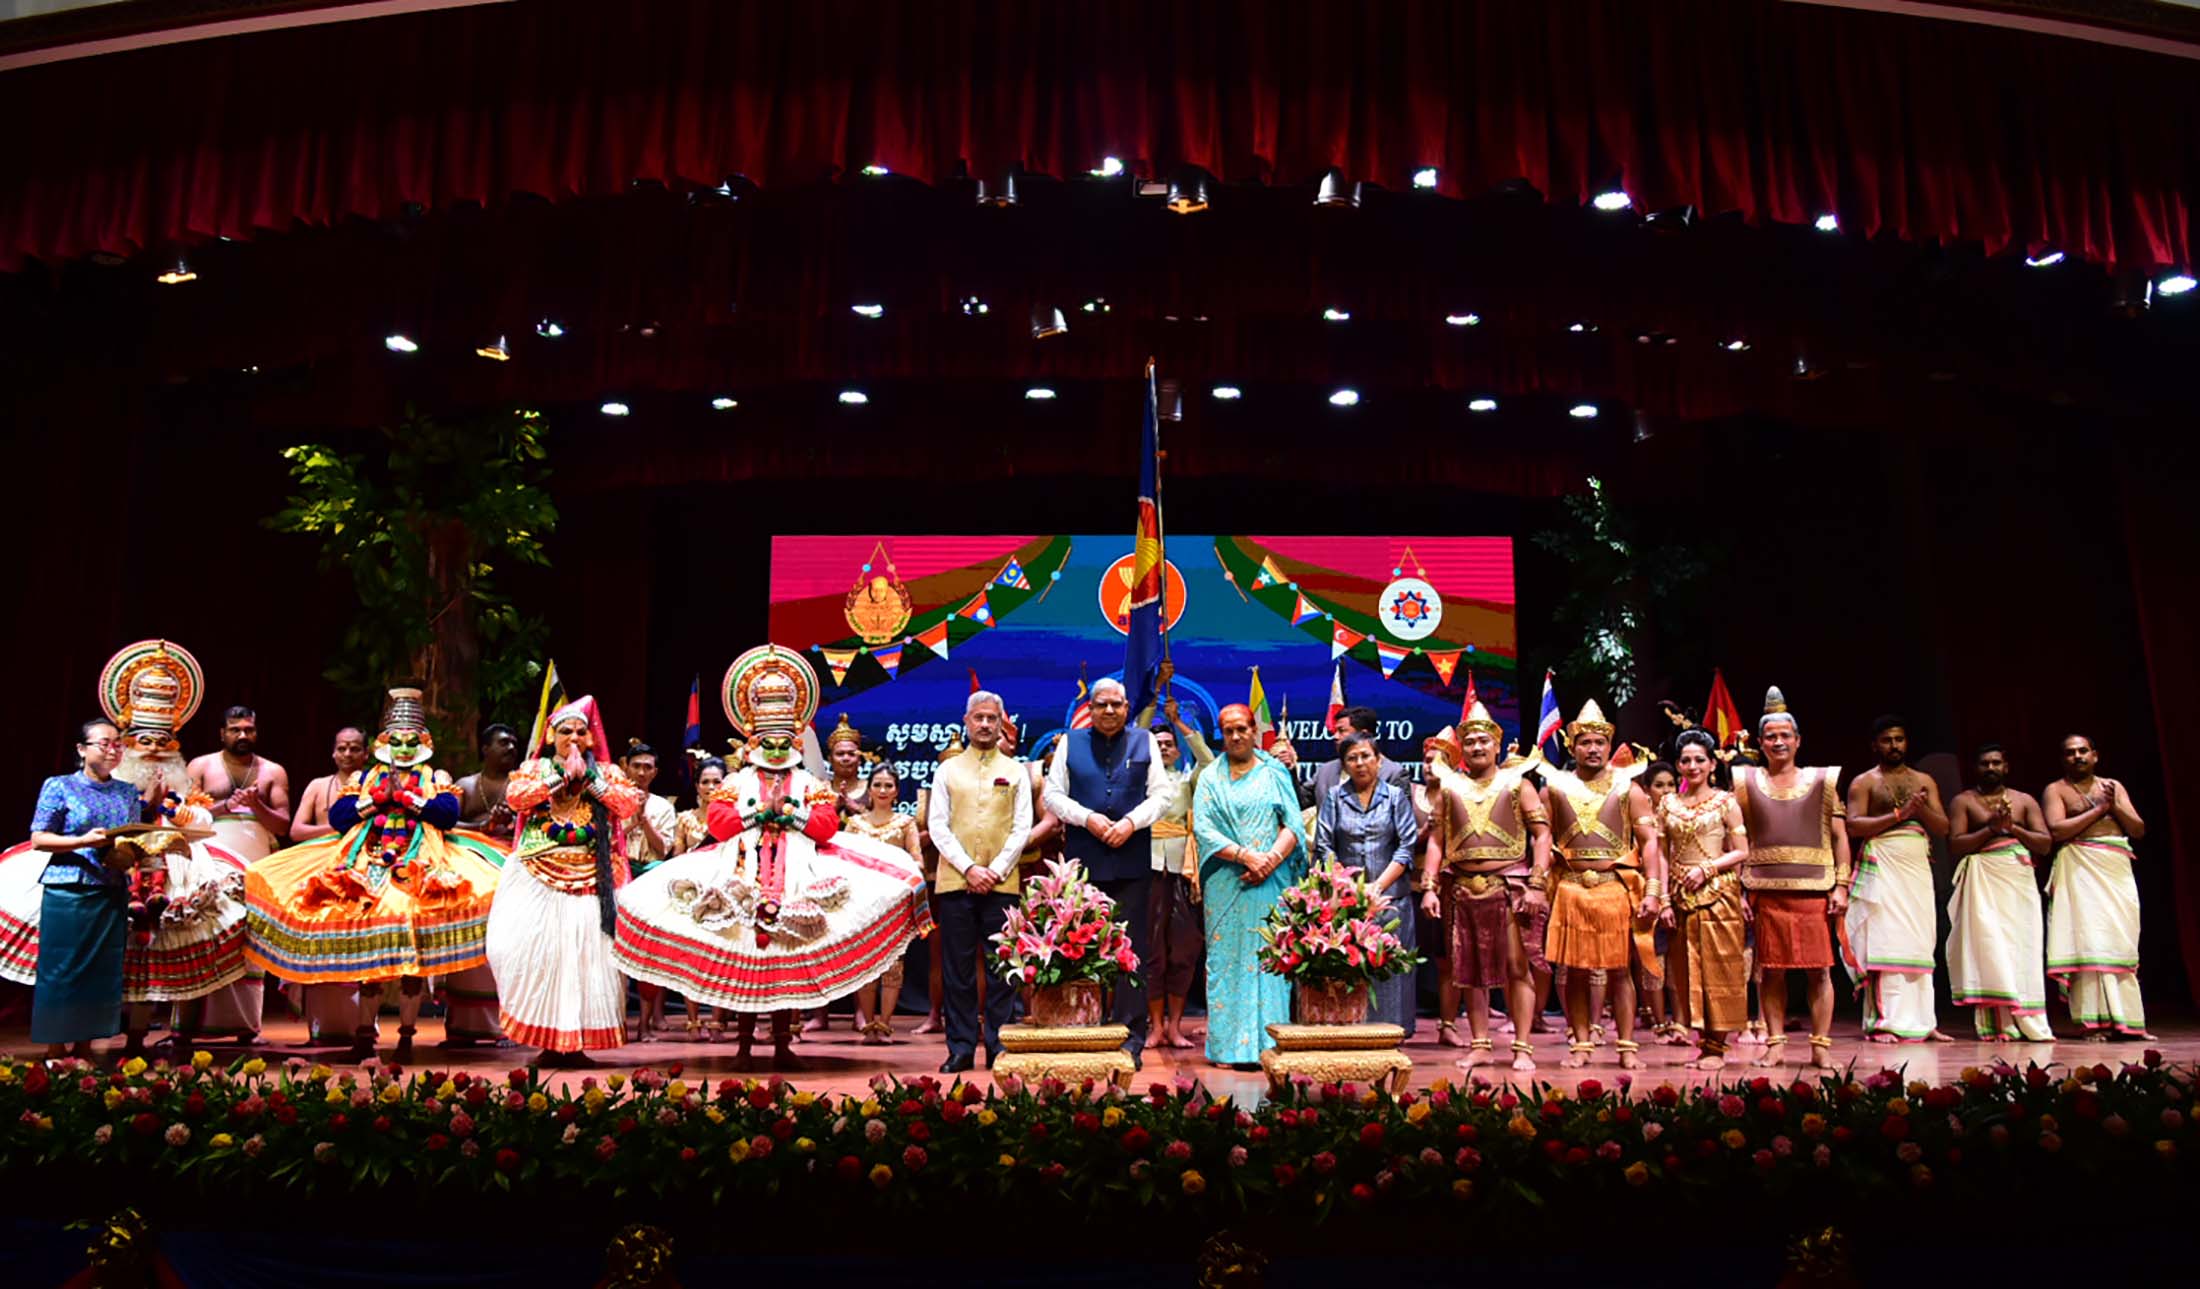 The Vice President, Shri Jagdeep Dhankhar, his spouse Dr Sudesh Dhankhar and Minister of External Affairs, Dr. S Jaishankar attending a cultural event commemorating the ASEAN Summits in Phnom Penh, Cambodia on 11 November, 2022.